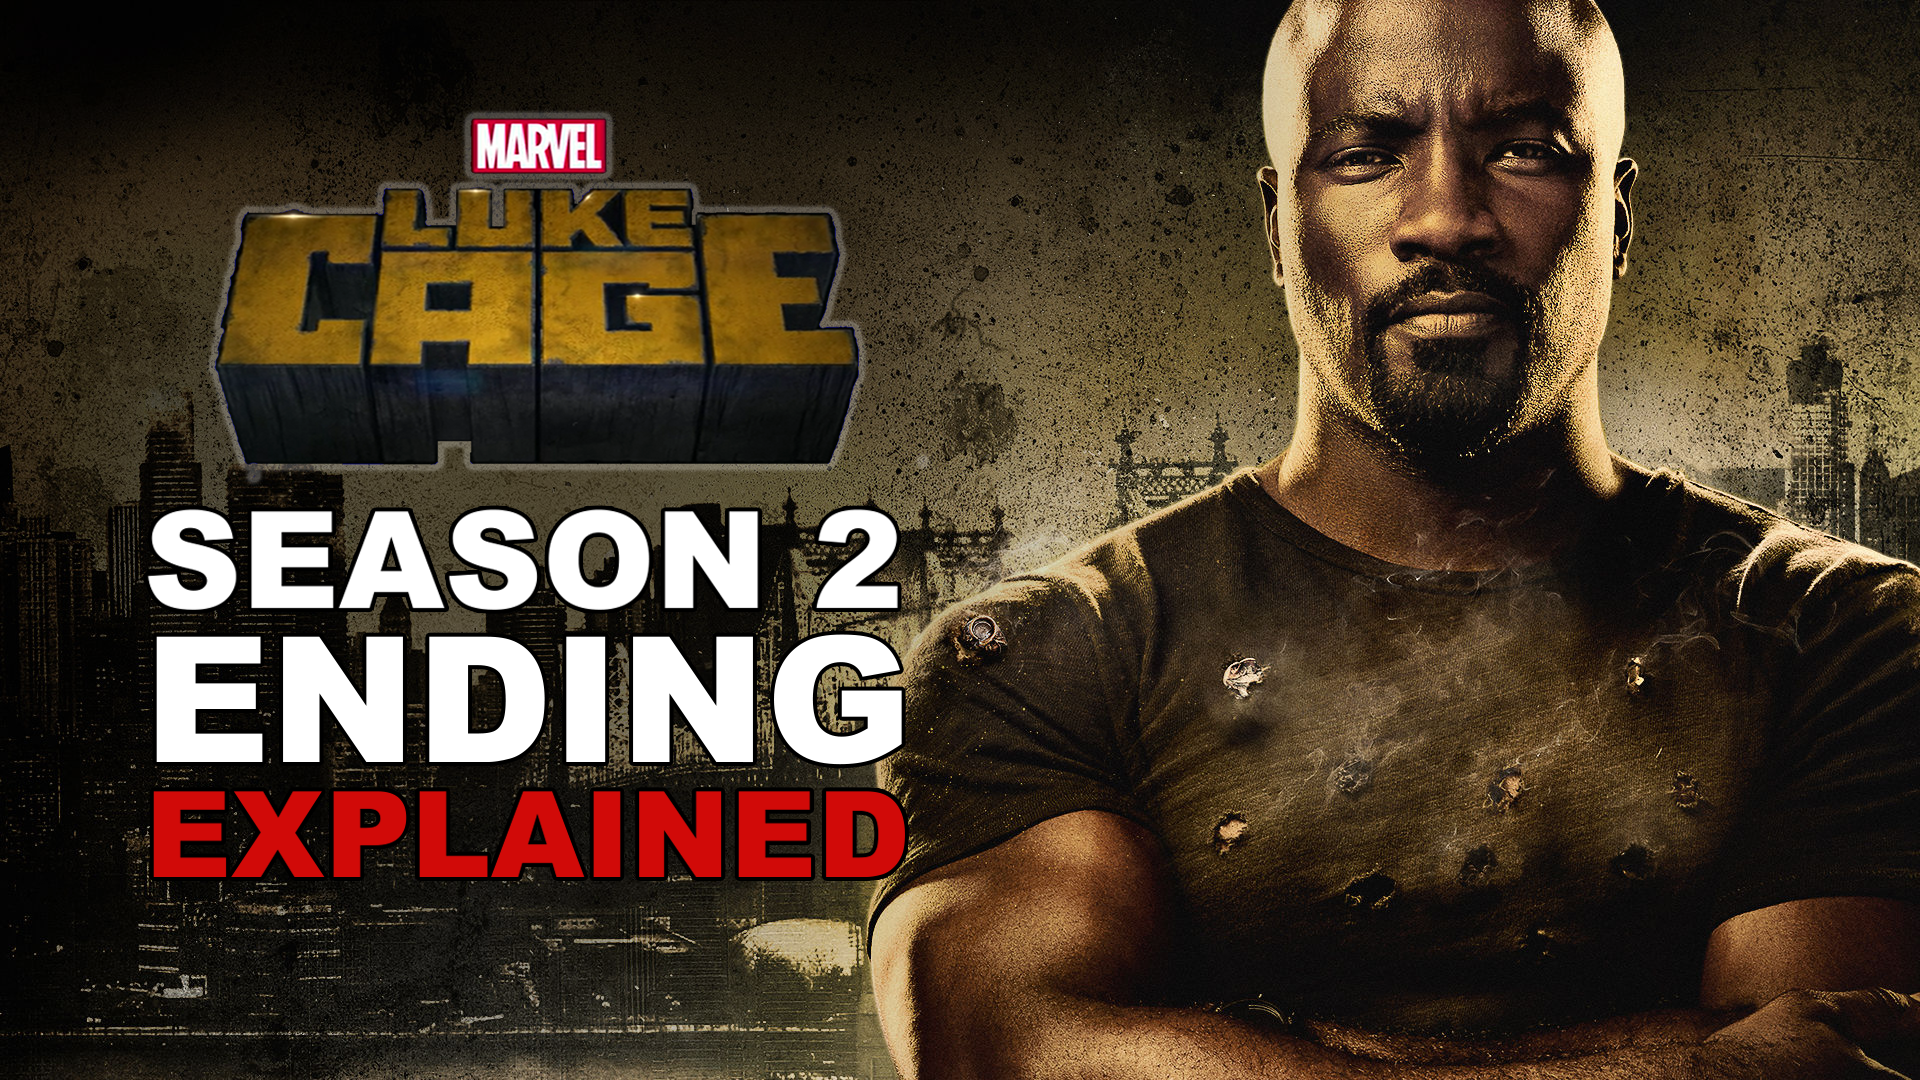 luke cage season 2 ending explained by deffinition discussing the final episode of the netflix series and review